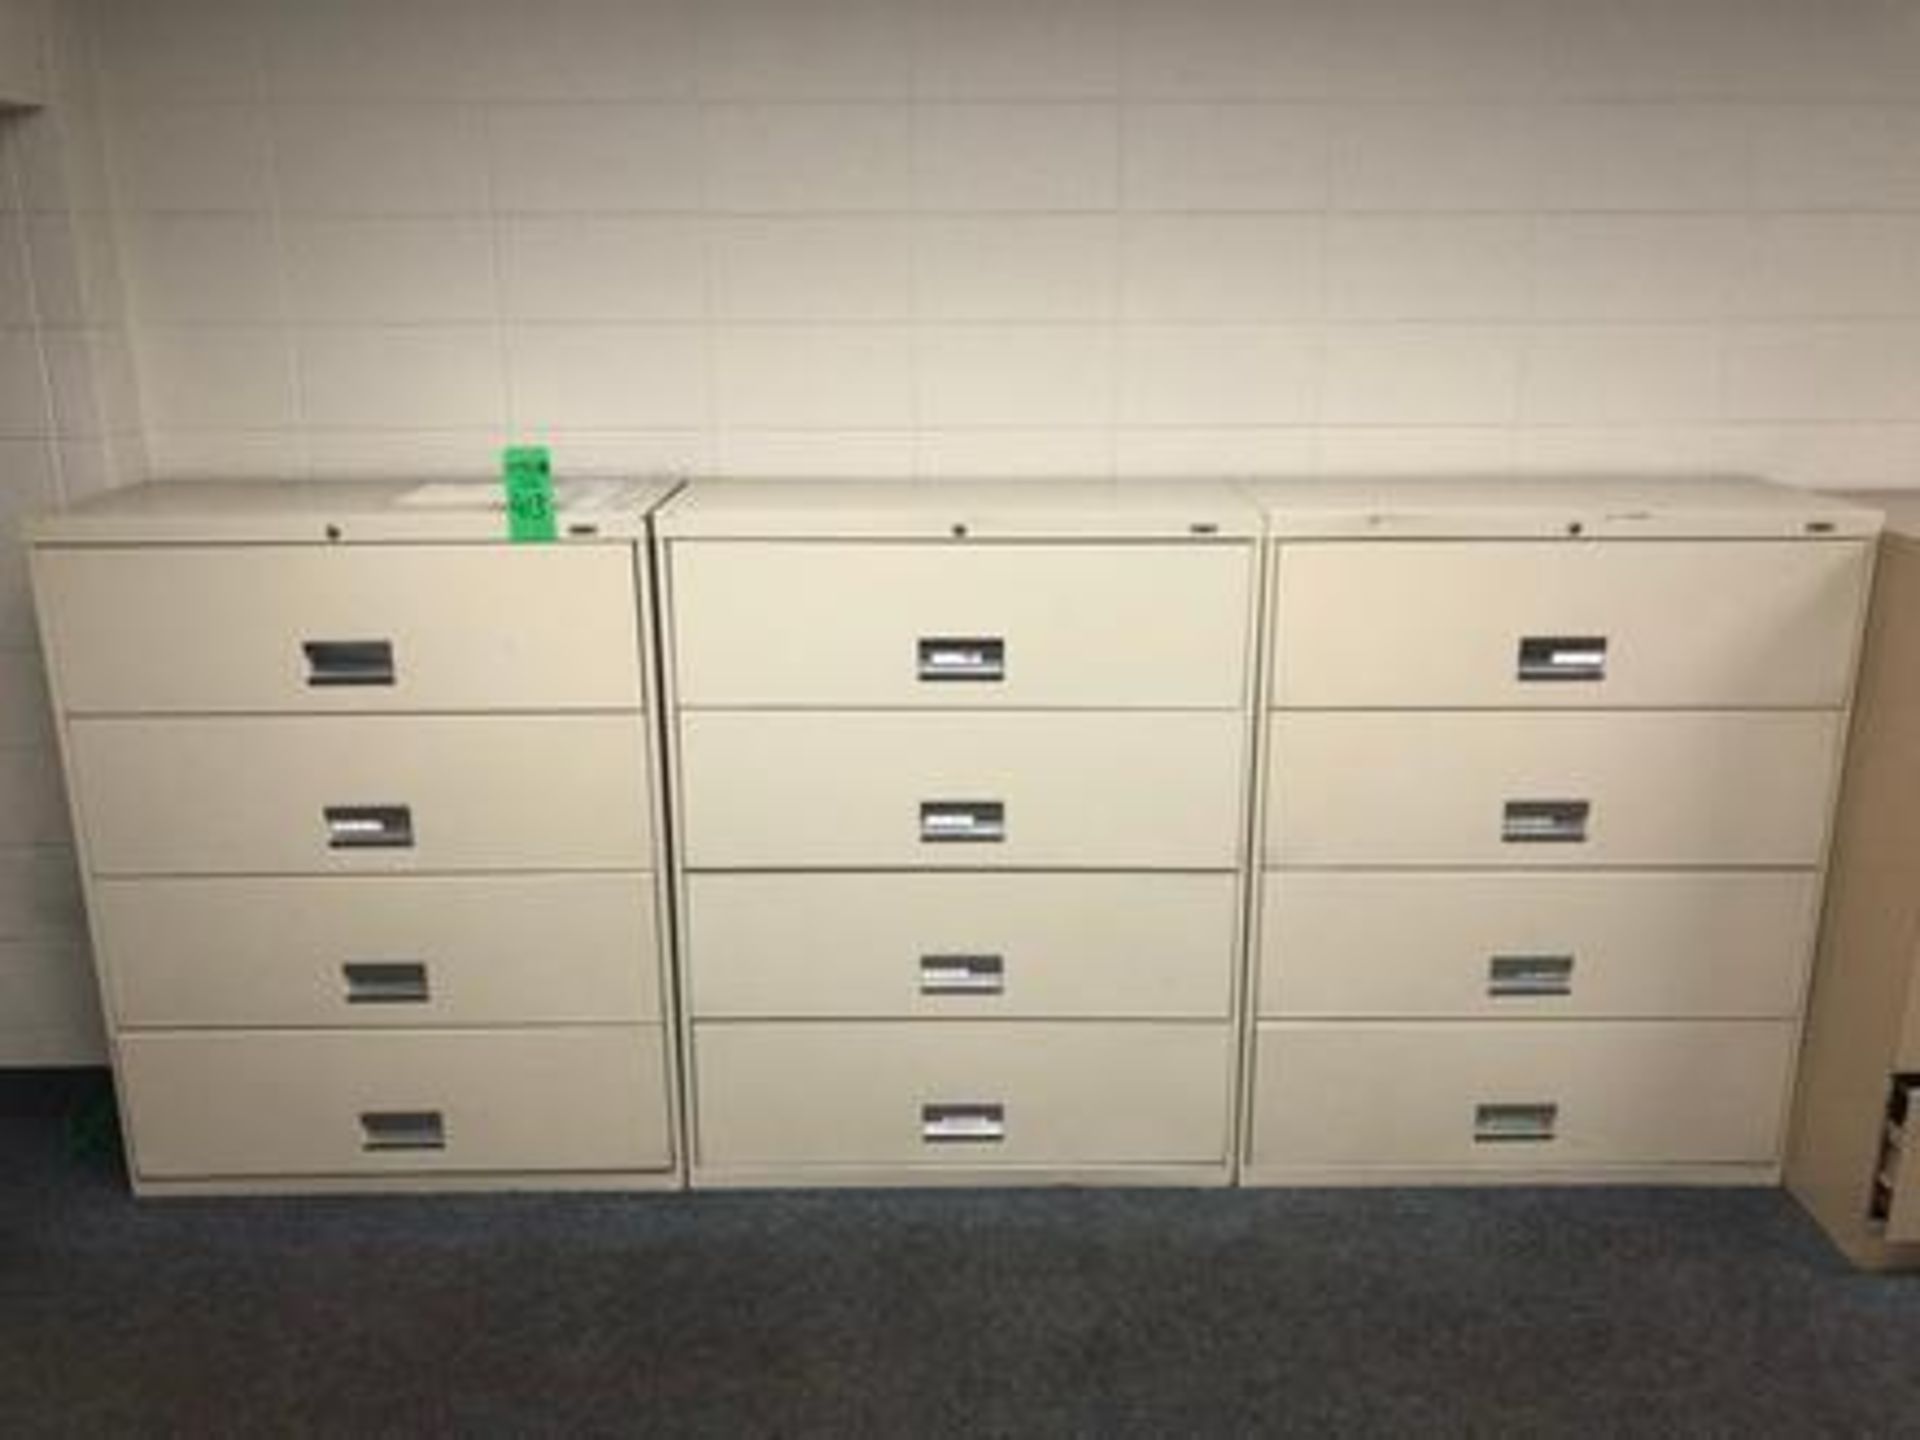 3 Flex Model Vertical 3 Drawers File Cabinet Size 42' X 18" X 52" - Image 2 of 9